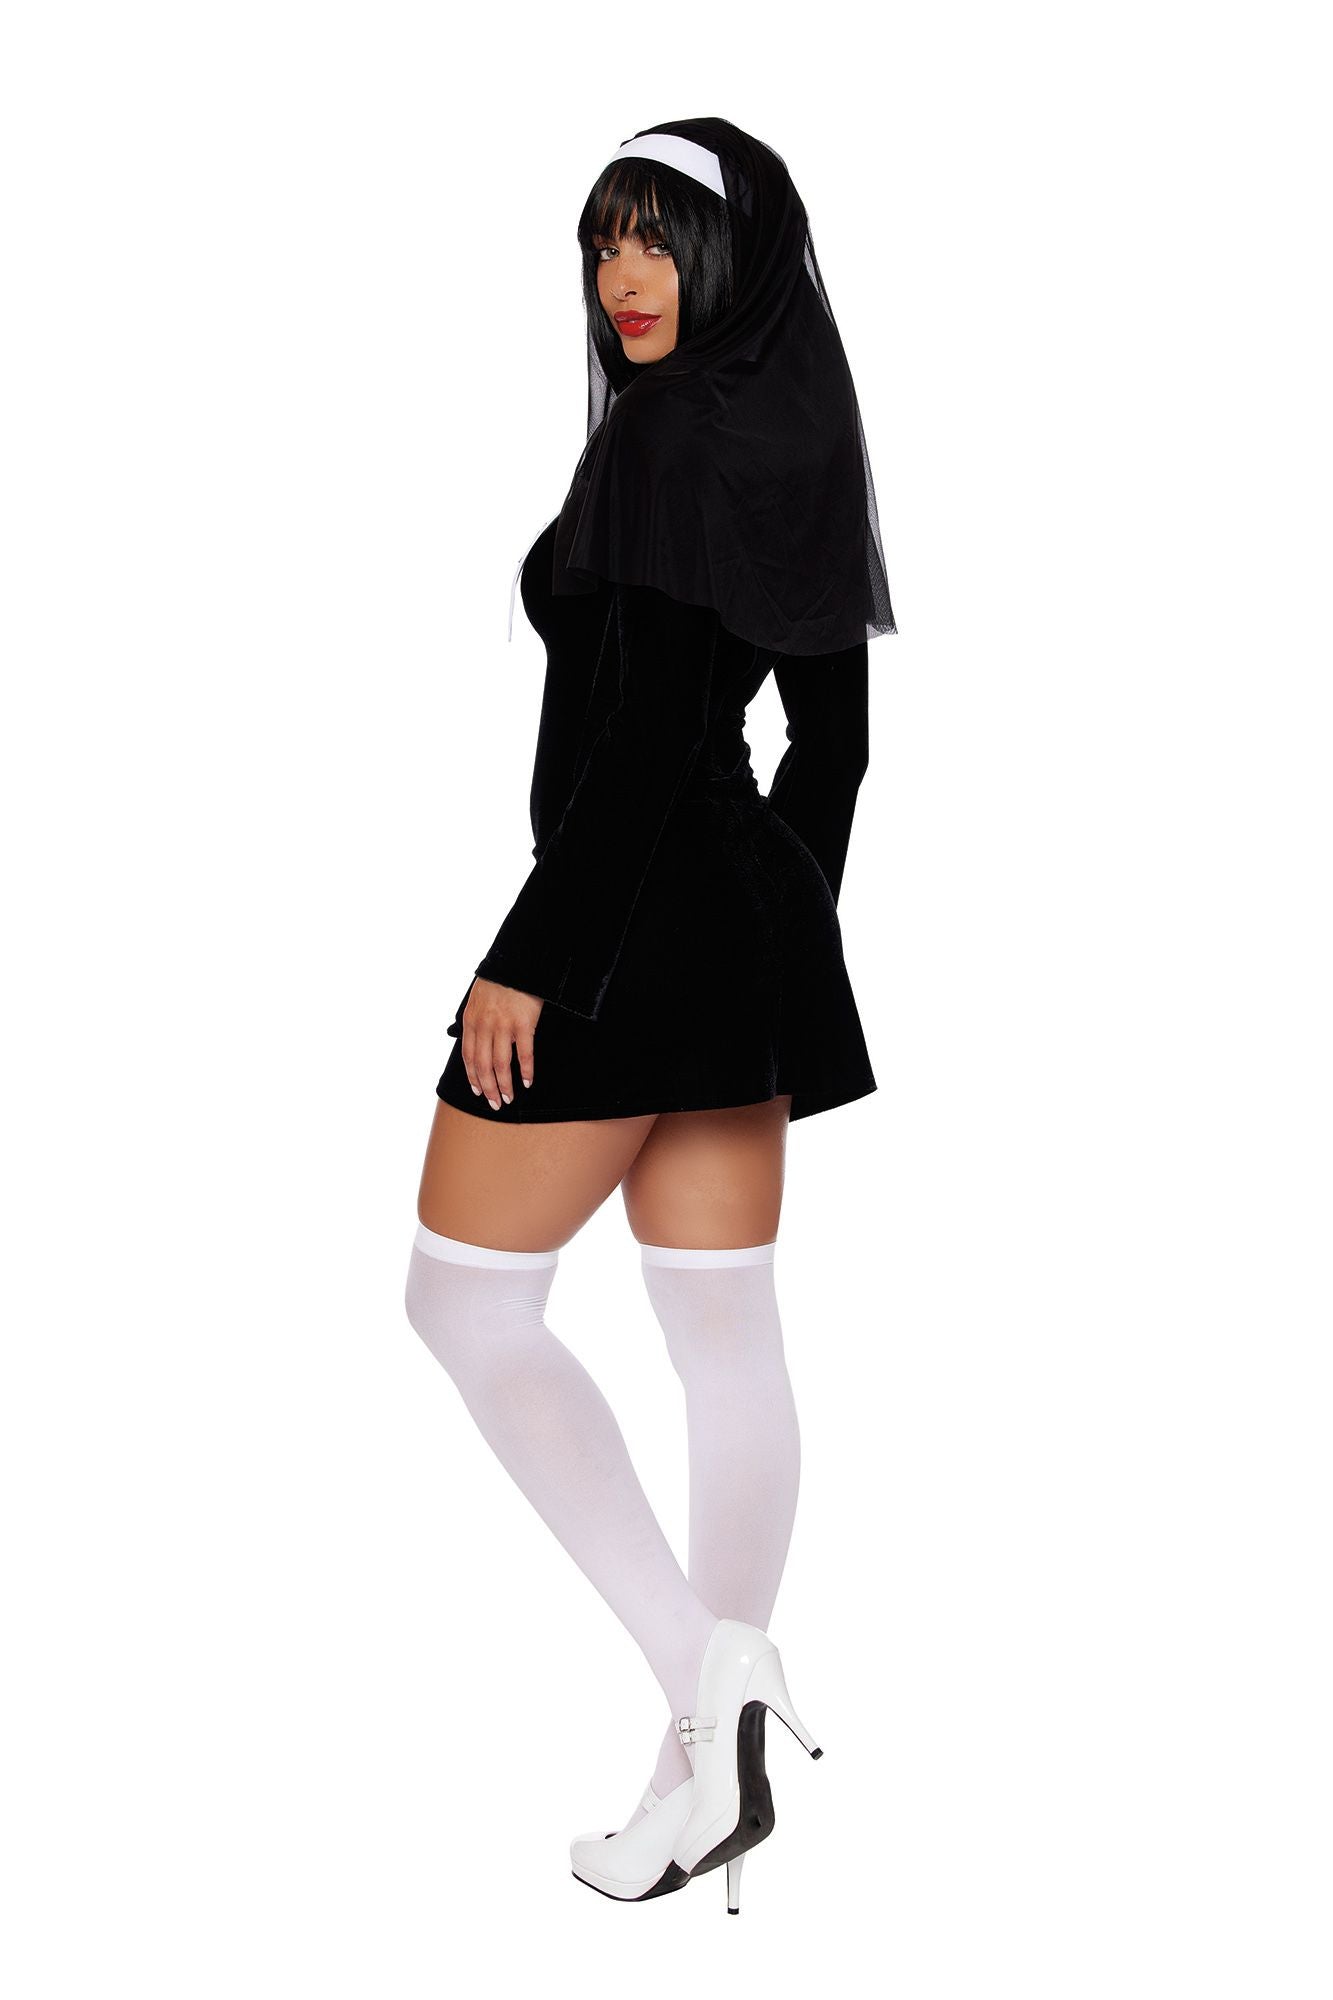 Nun of Your Business Costume Adult